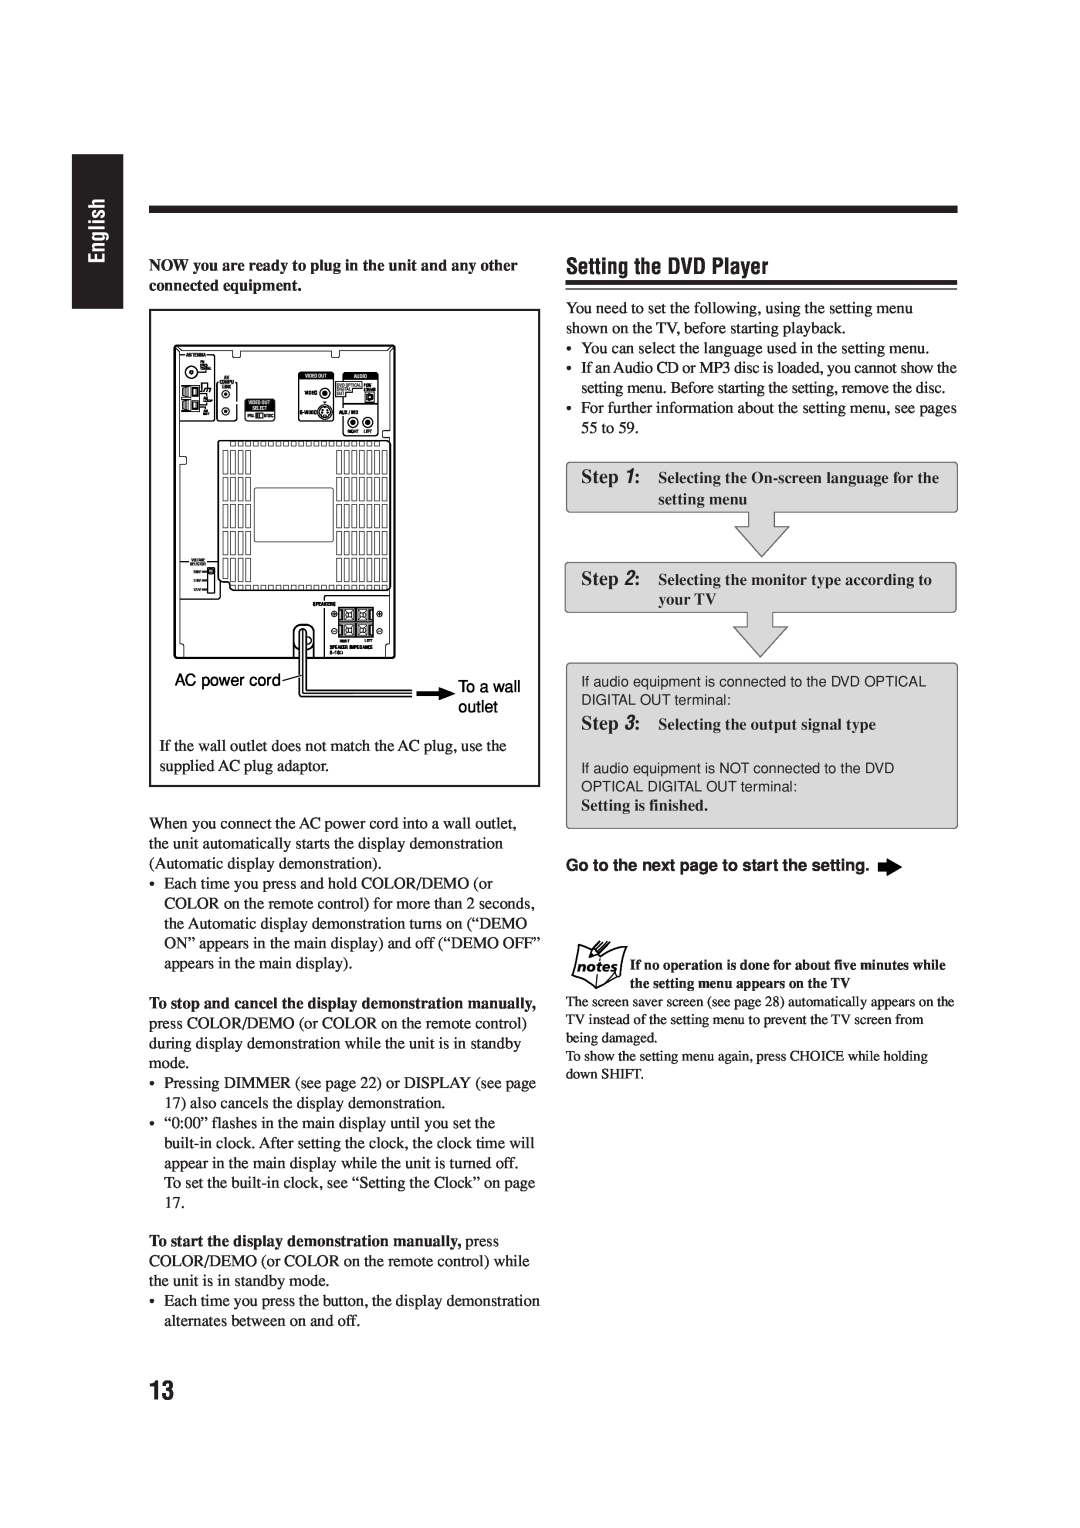 JVC LVT0954-007A manual Setting the DVD Player, English, Go to the next page to start the setting 